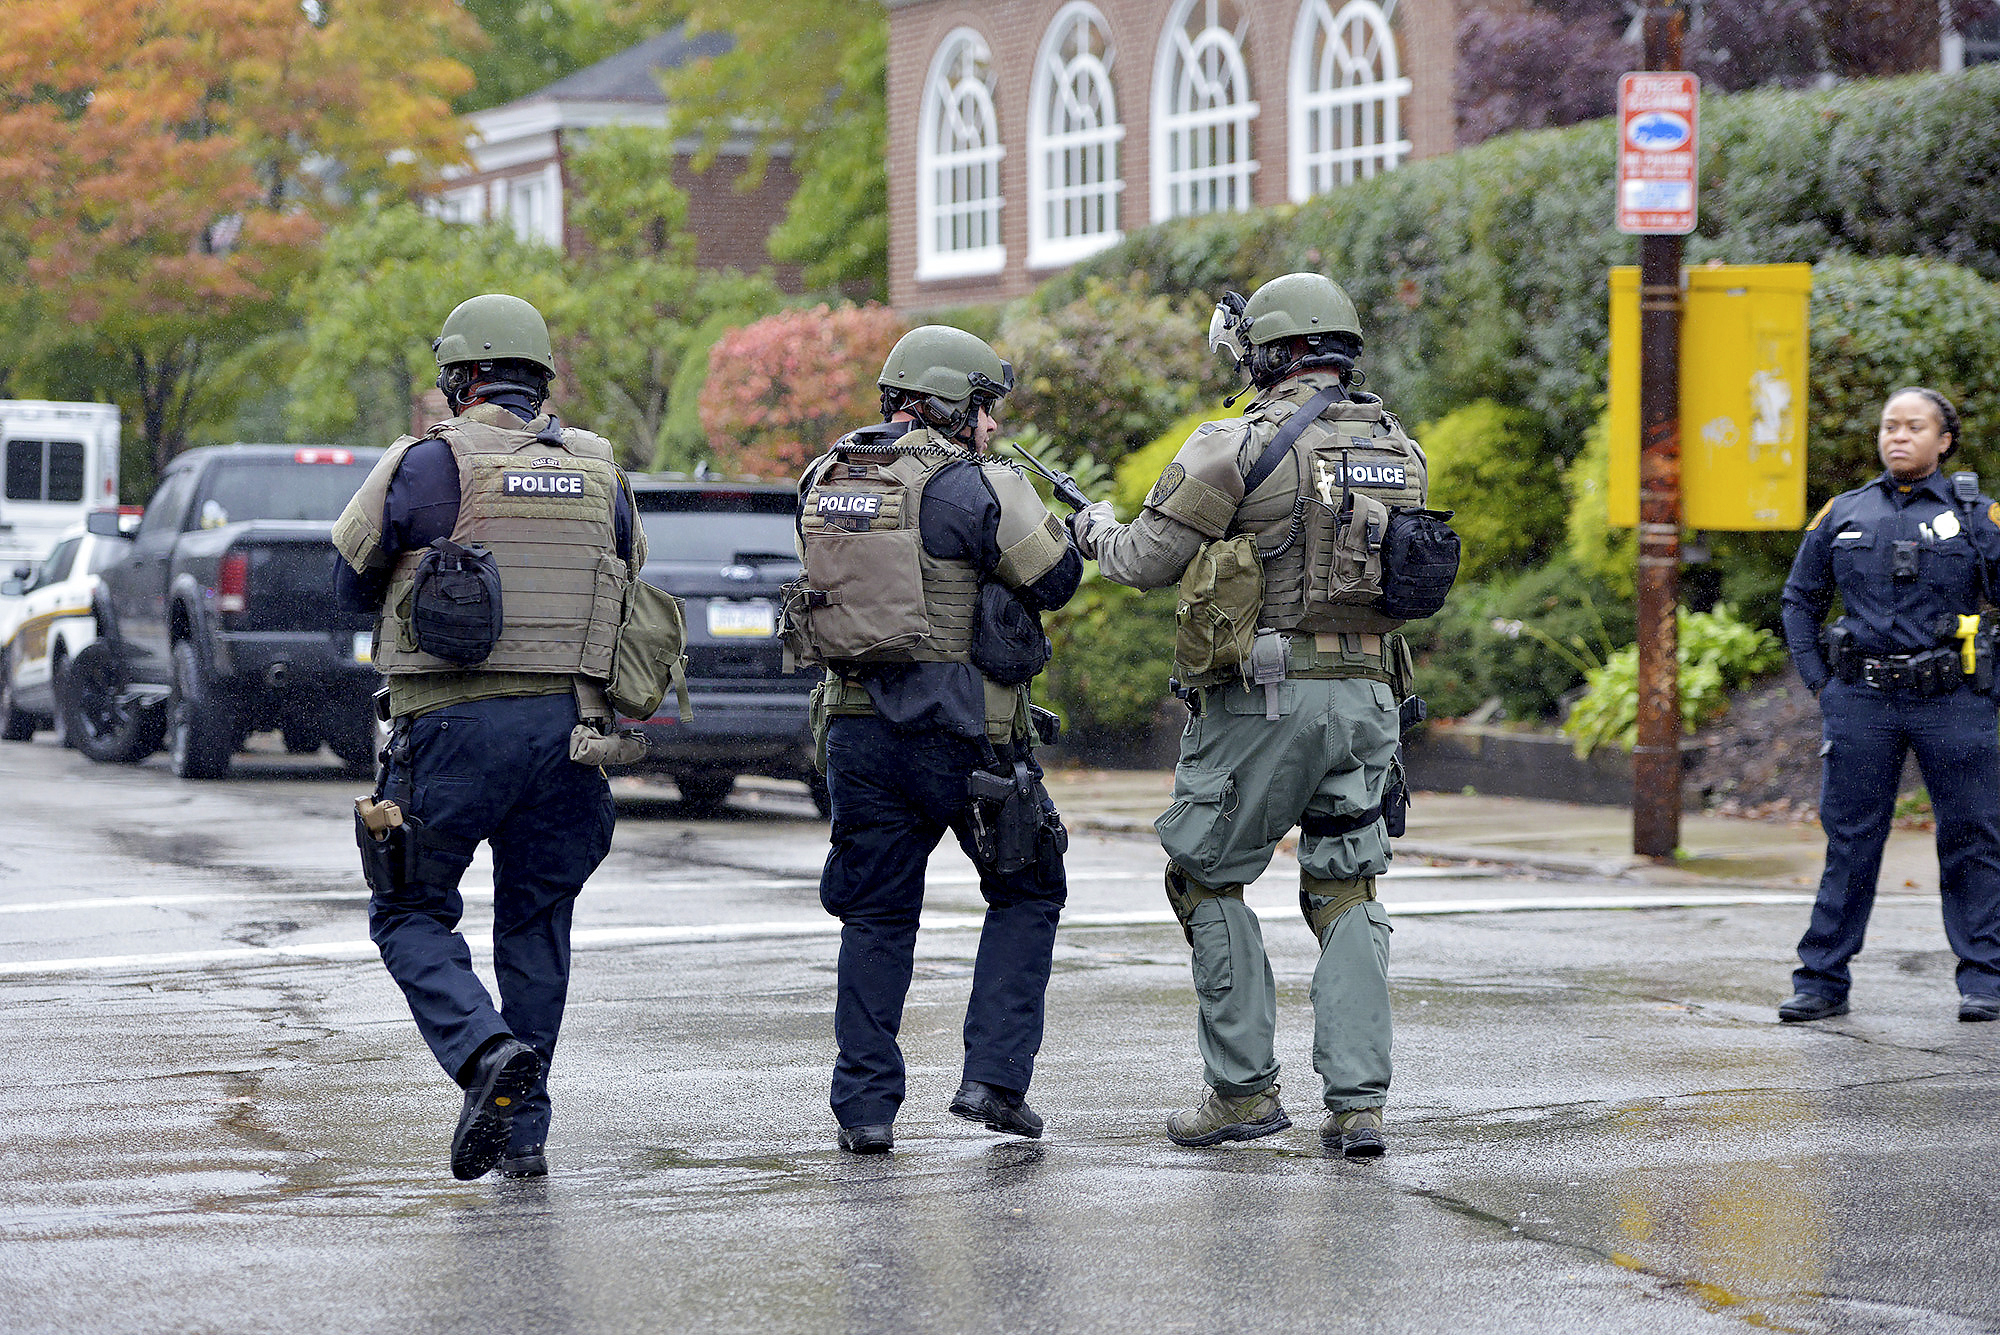 PHOTO: Police respond to an active shooter situation at the Tree of Life synagogue in Pittsburgh, Oct. 27, 2018.